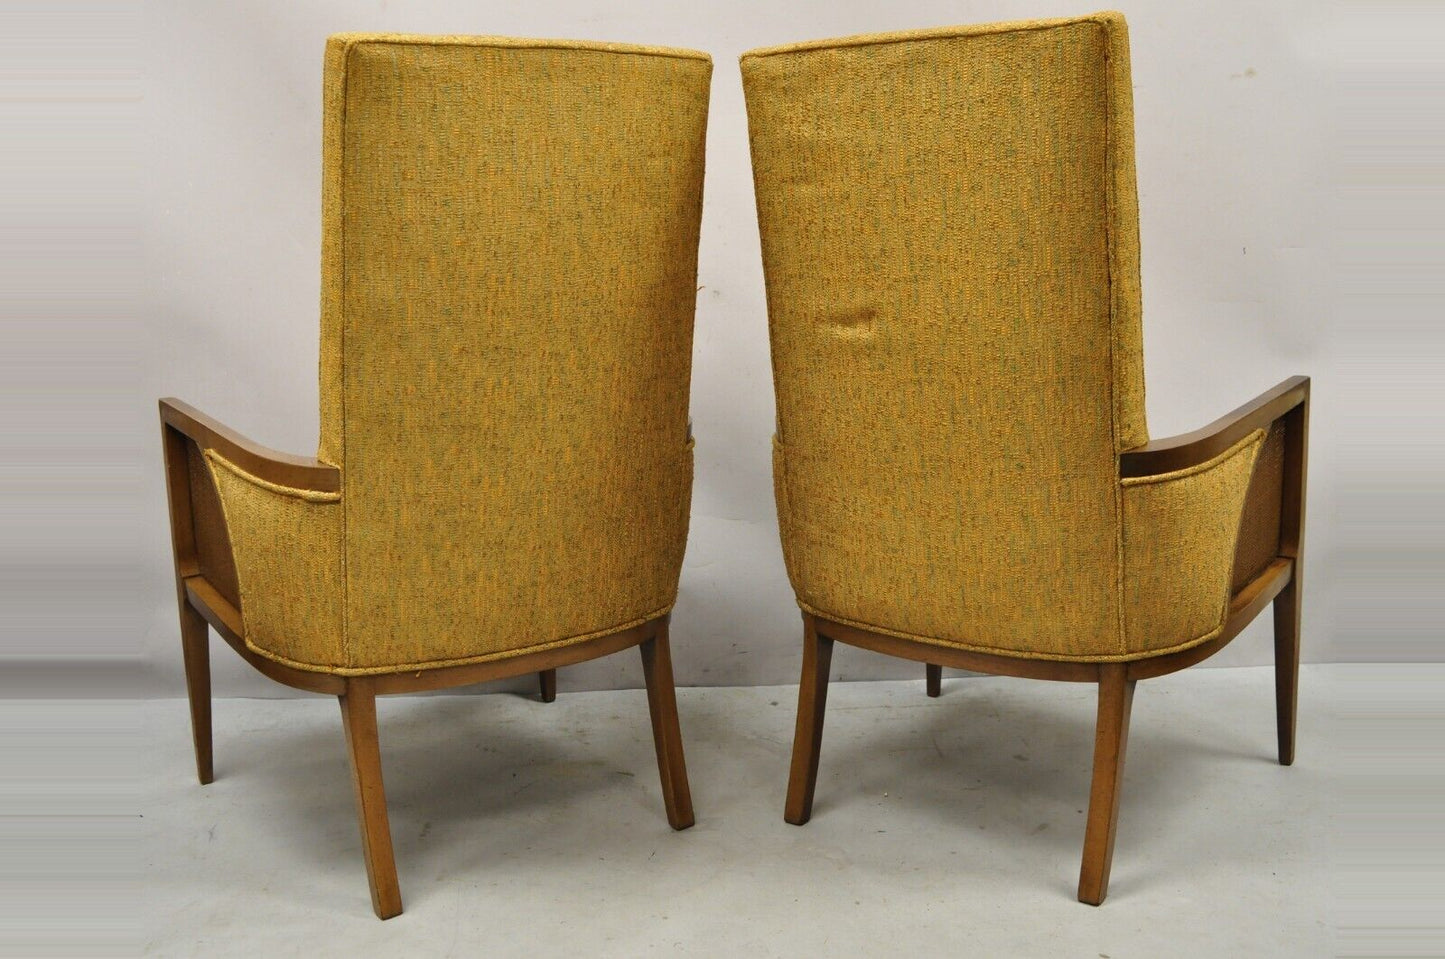 Mid Century Hollywood Regency Sculpted Wood Cane Panel Lounge Chairs - a Pair